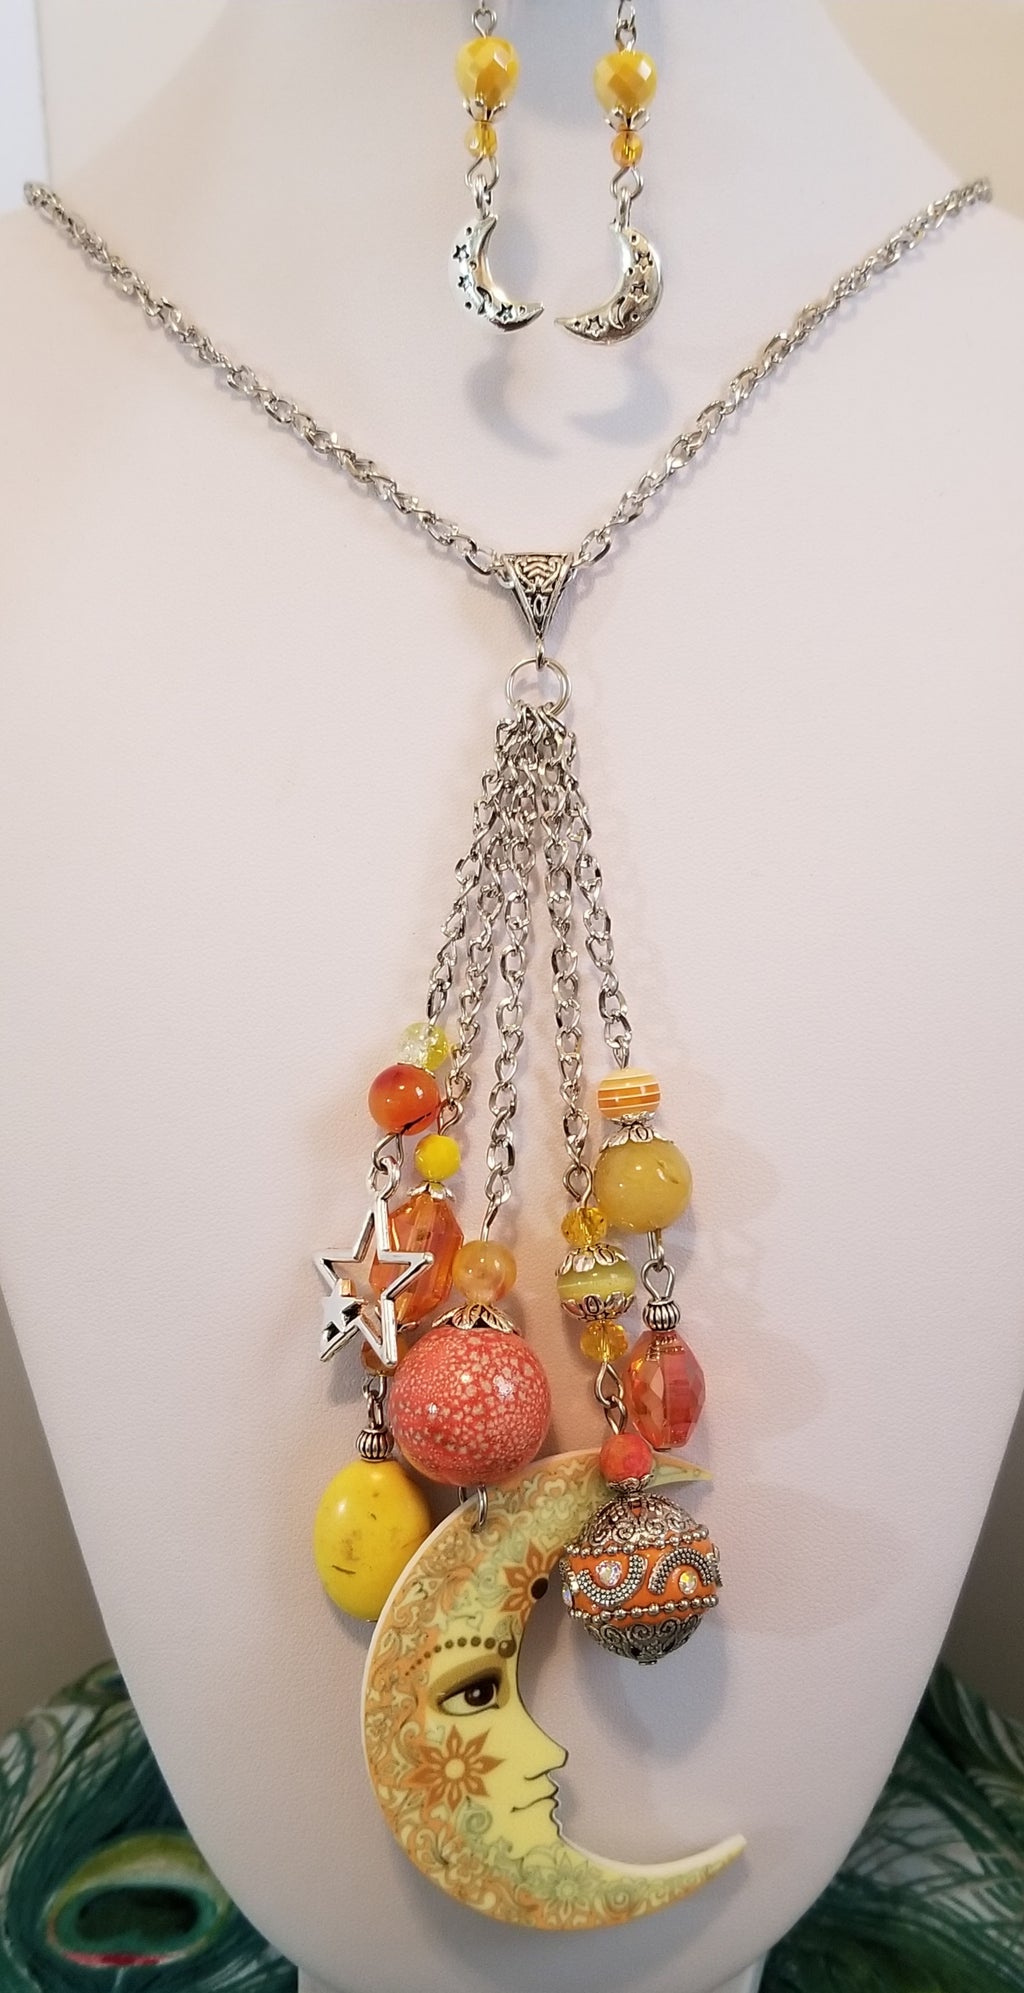 26 inch  yellow and orange necklace with five strands of  beads  and charms hanging from  middle